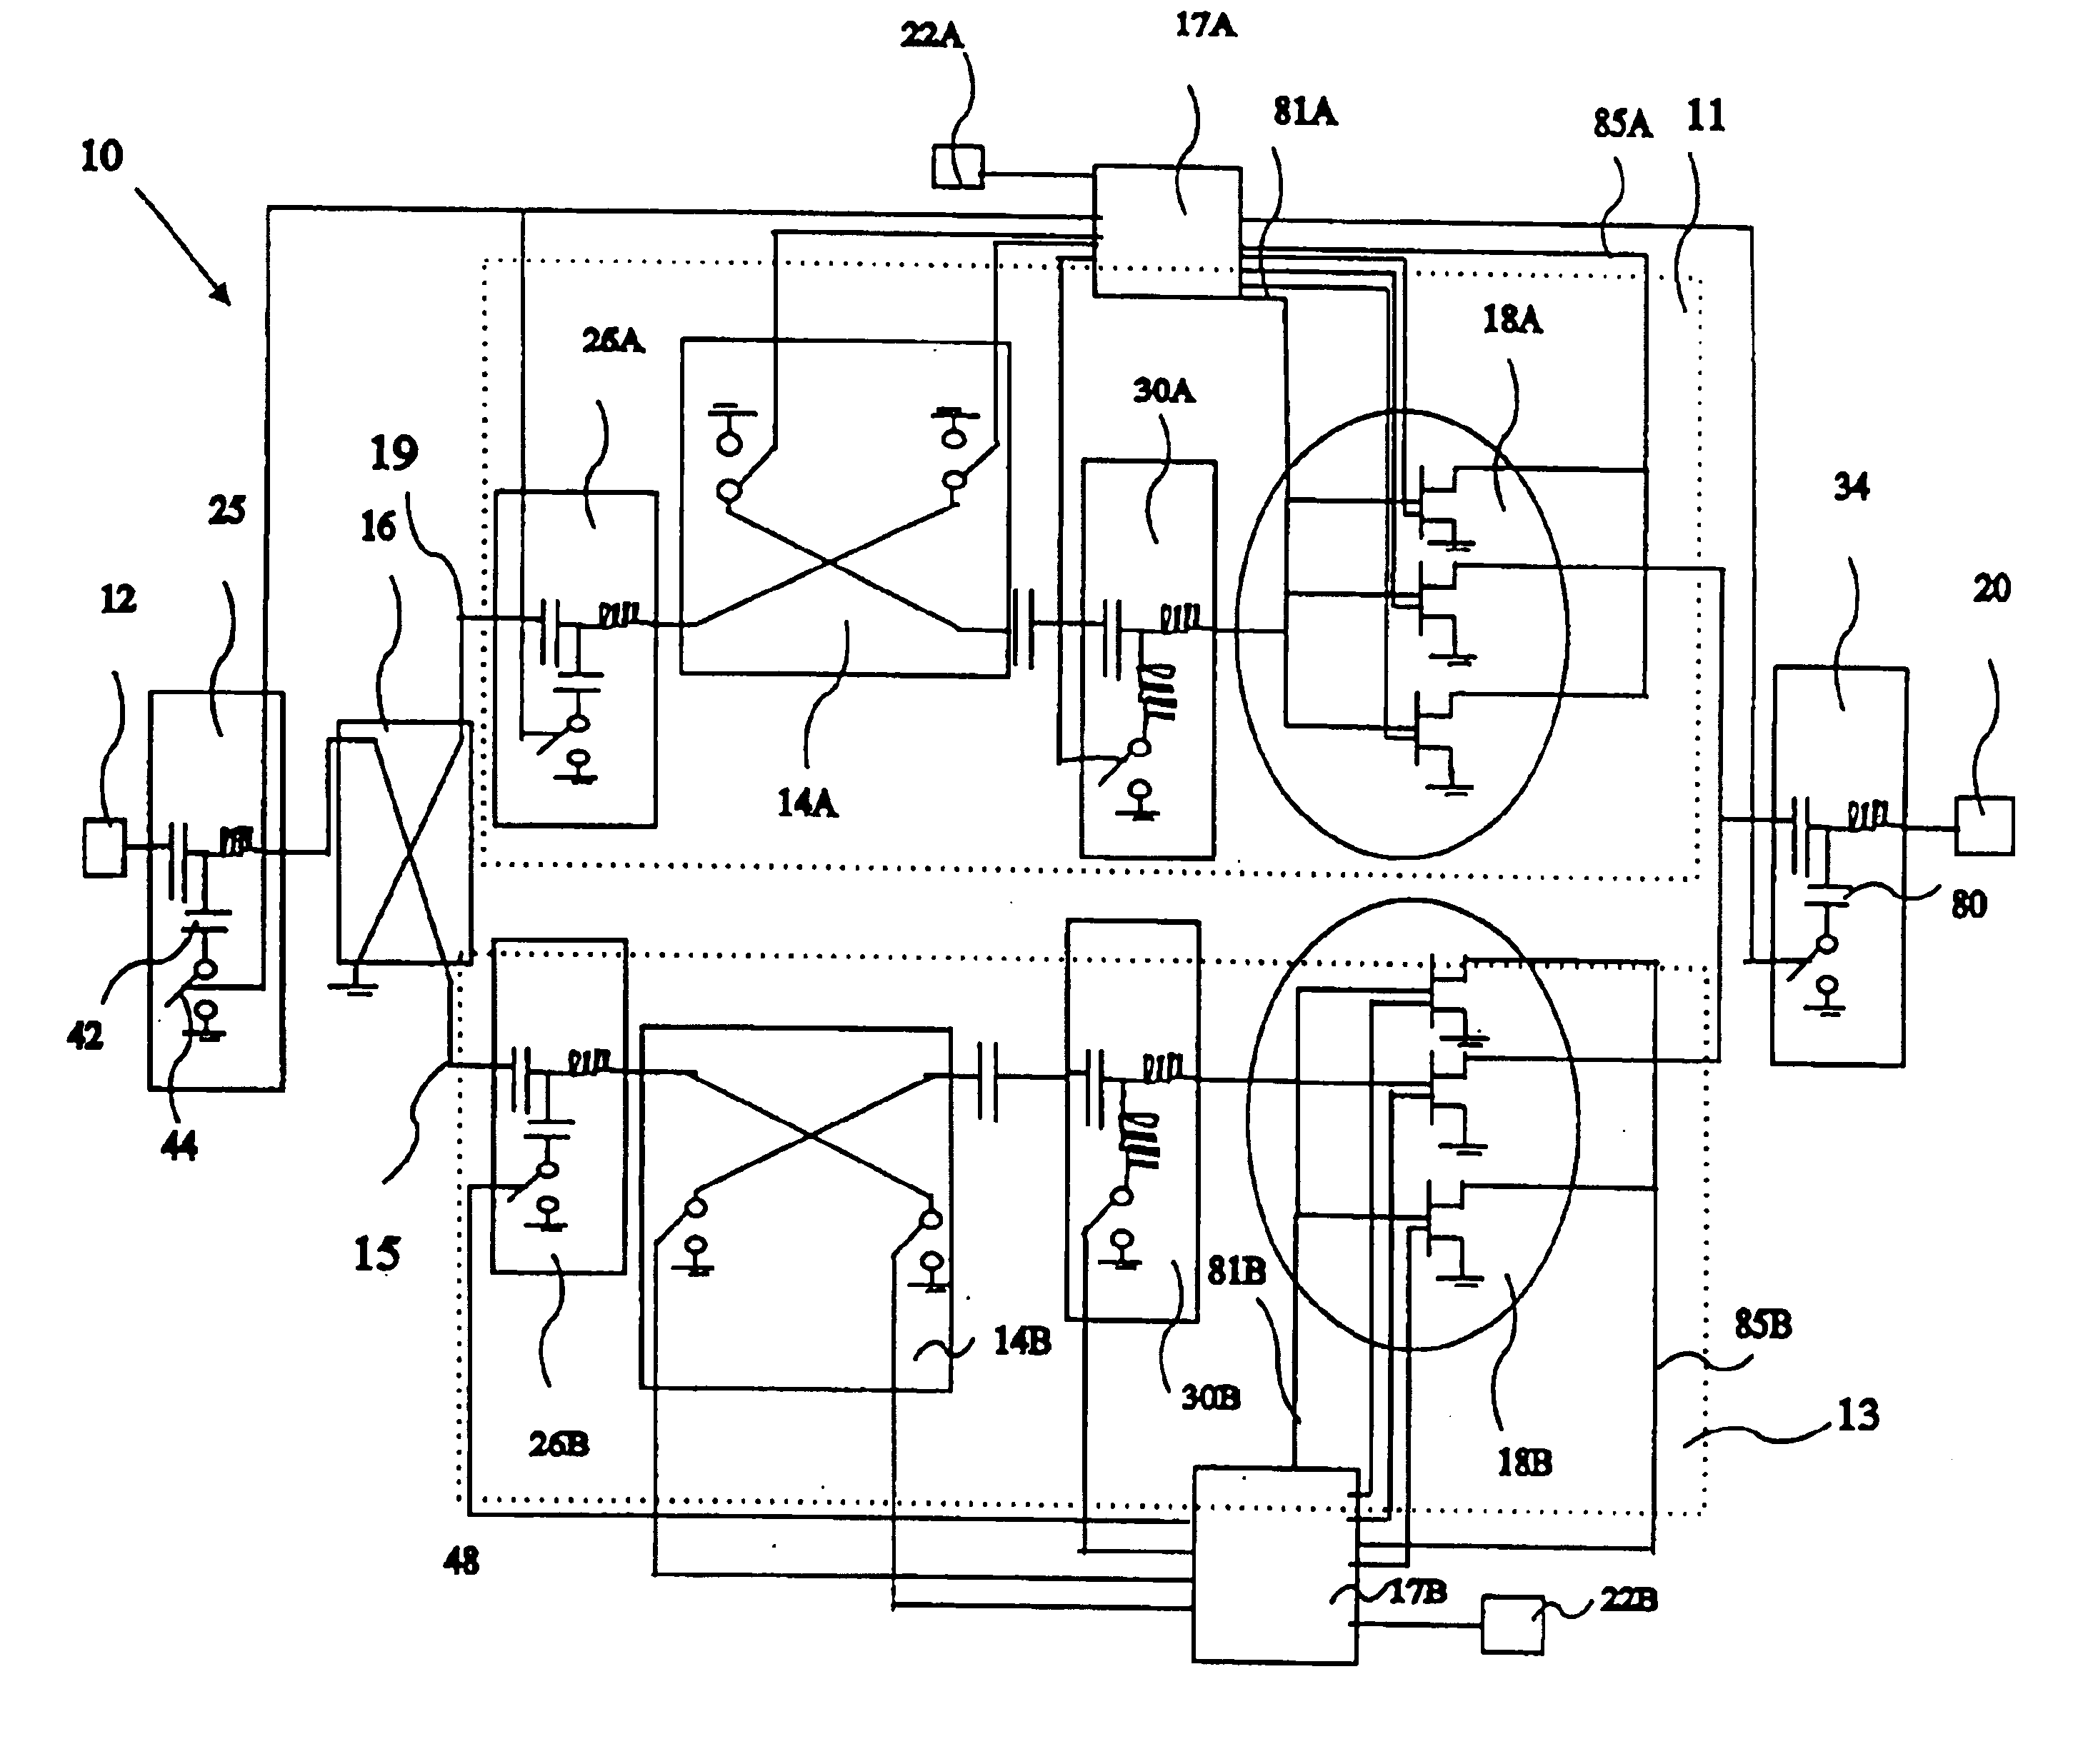 Electronically programmable multimode circuit